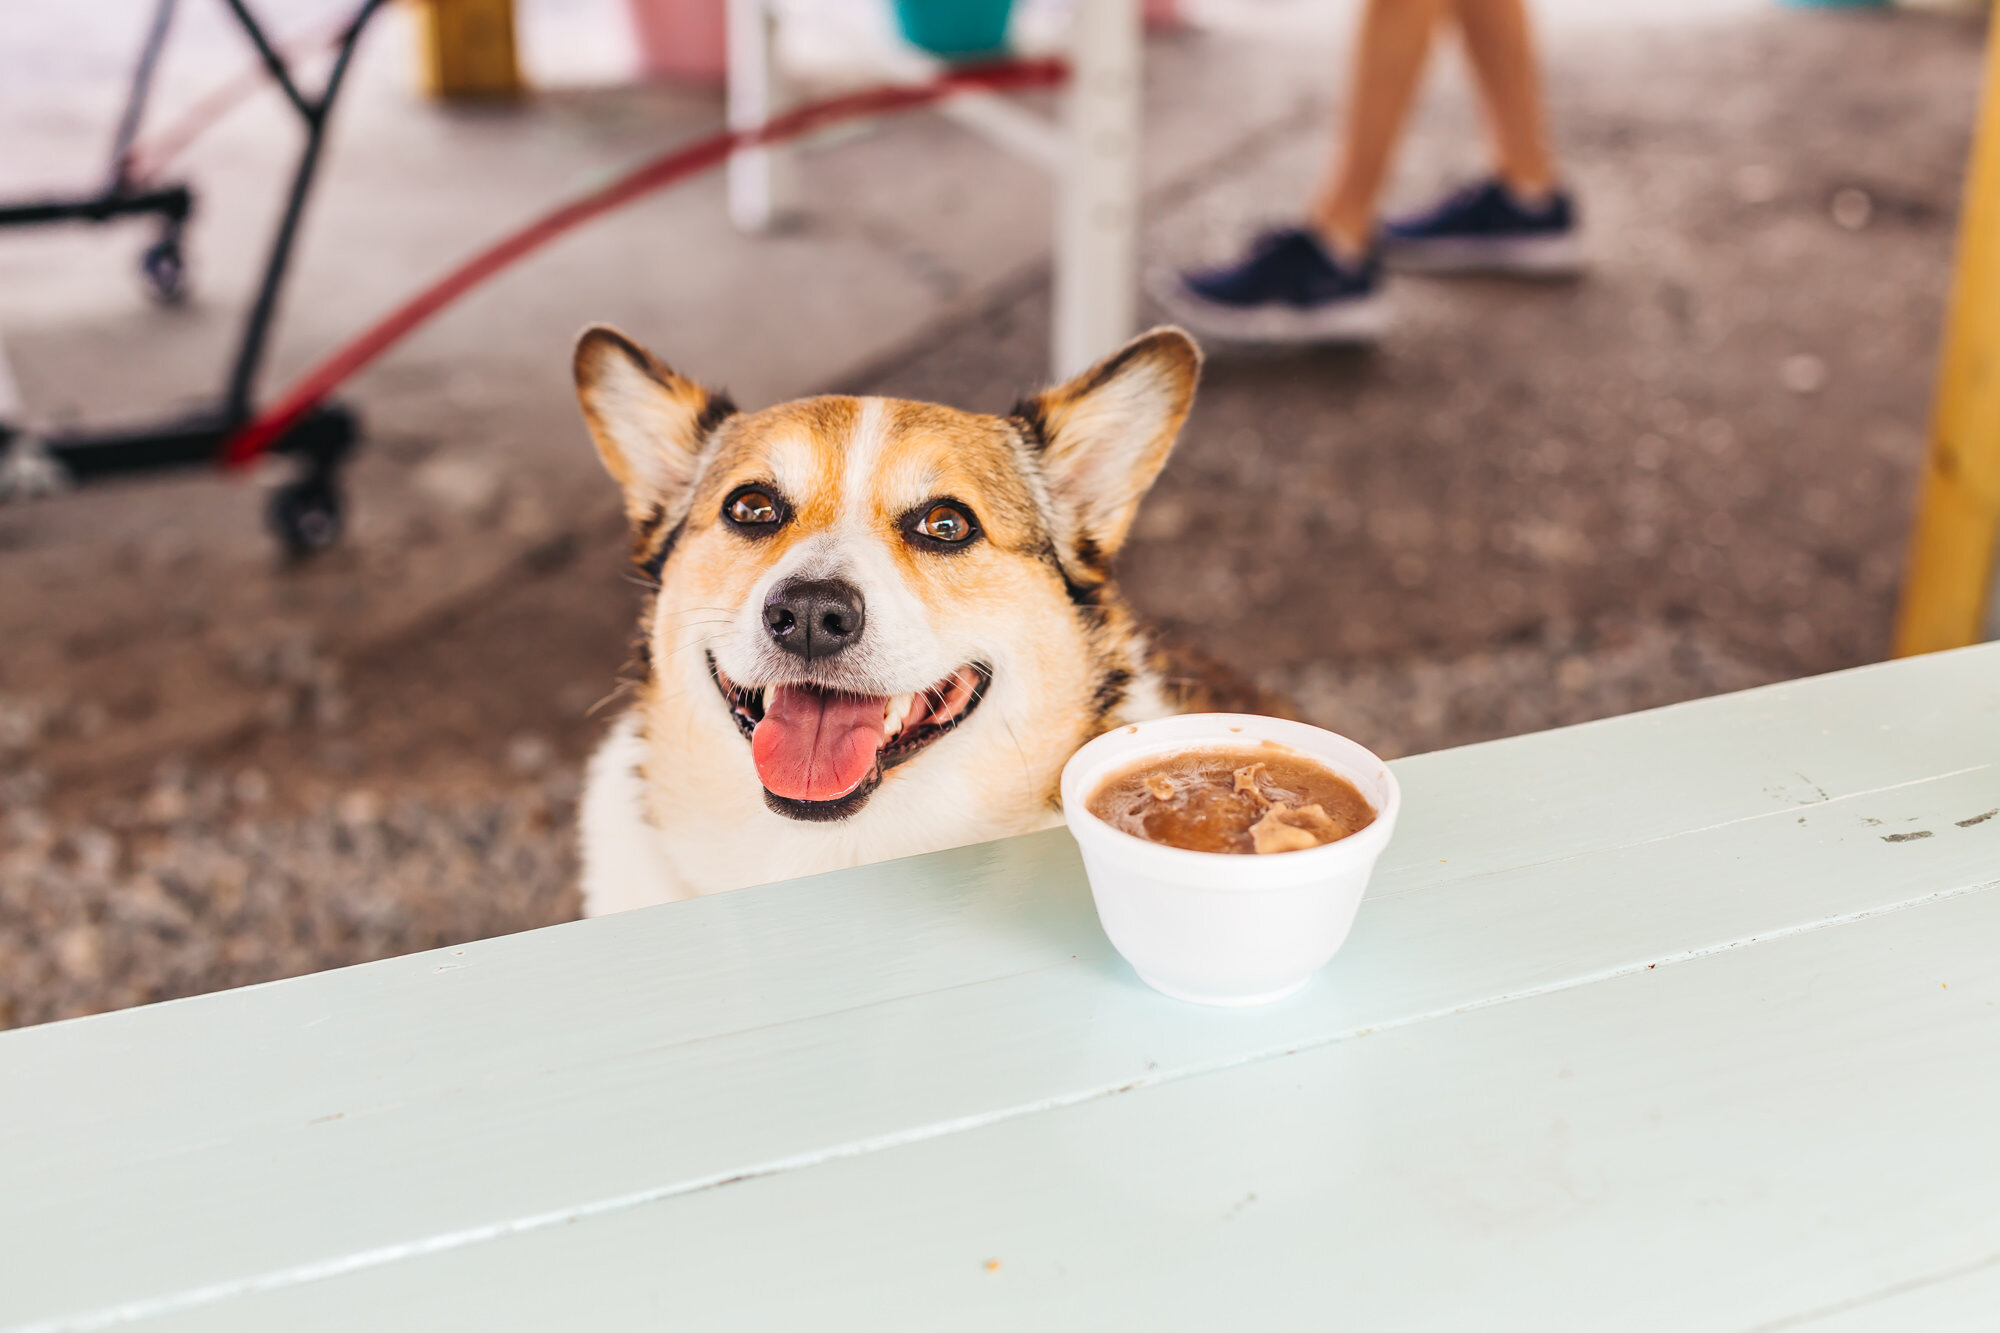 Top places to bring your dog in Tampa Bay, from breweries to